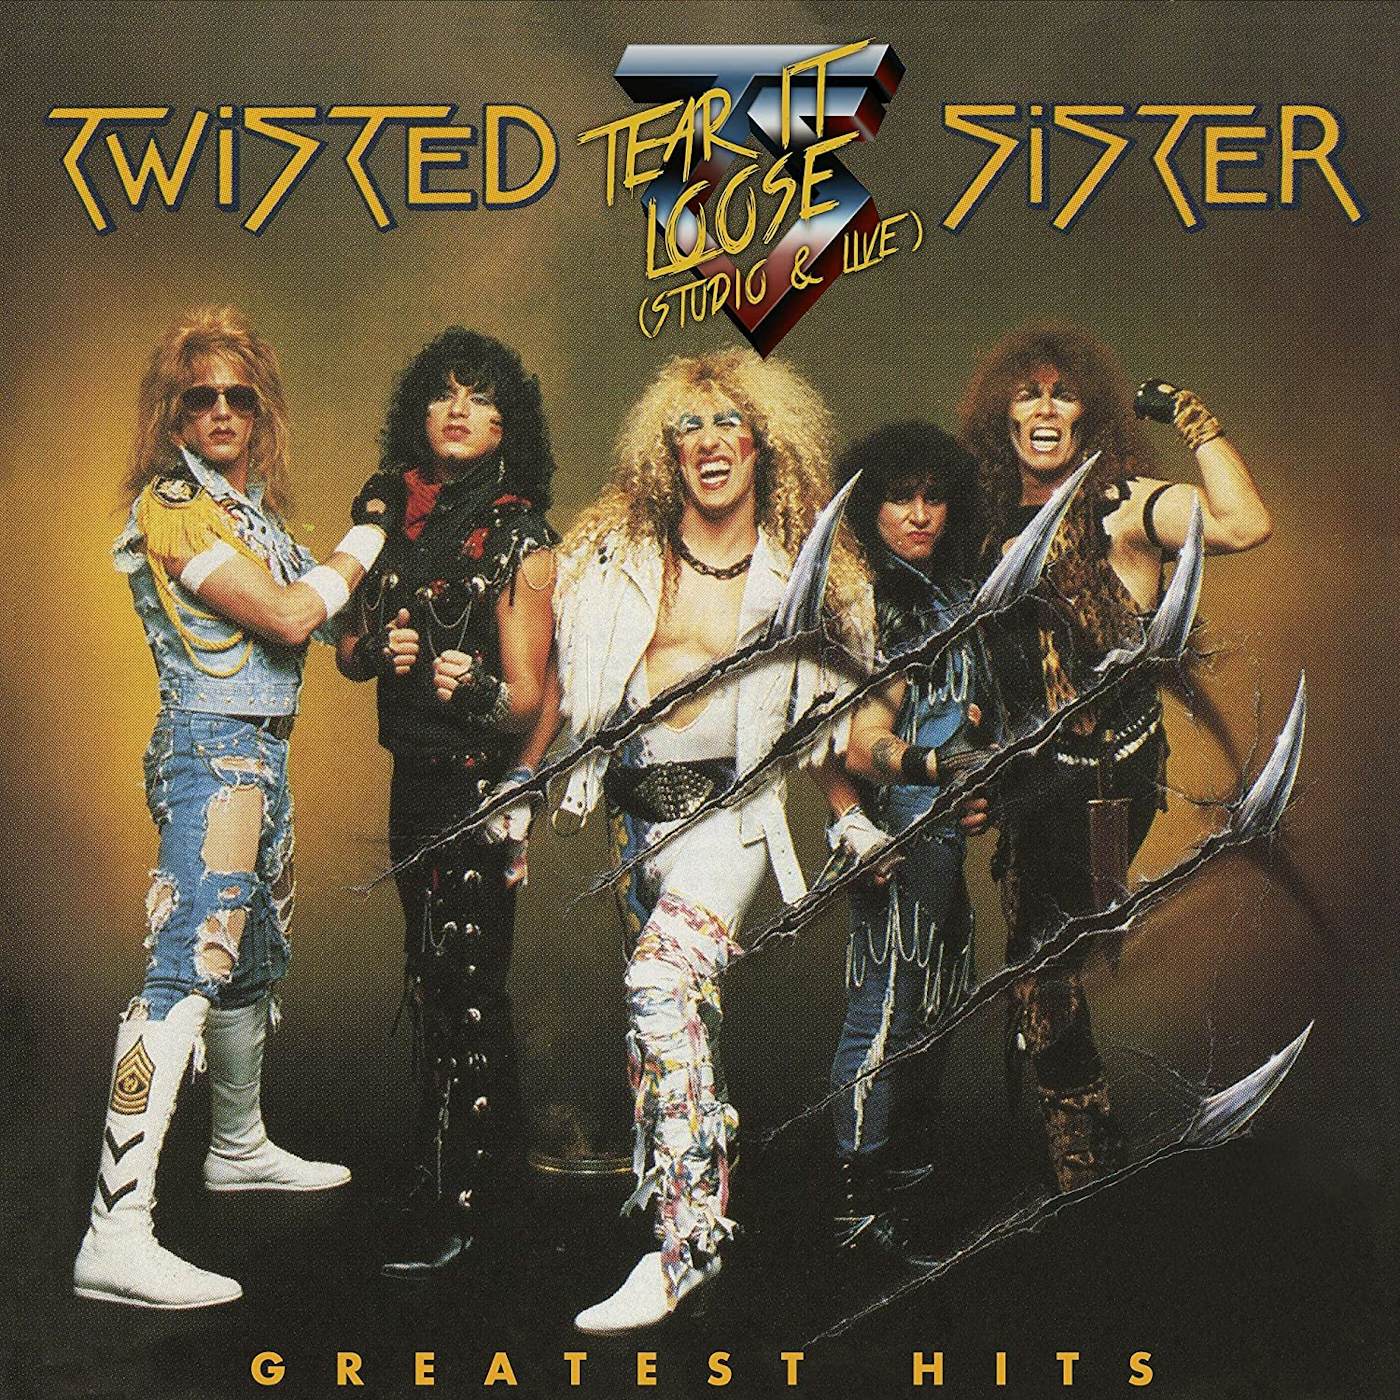 Twisted Sister GREATEST HITS -TEAR IT LOOSE - ATLANTIC YEARS - STUDIO & LIVE (TRANSLUCENT GOLD VINYL/LIMITED) Vinyl Record